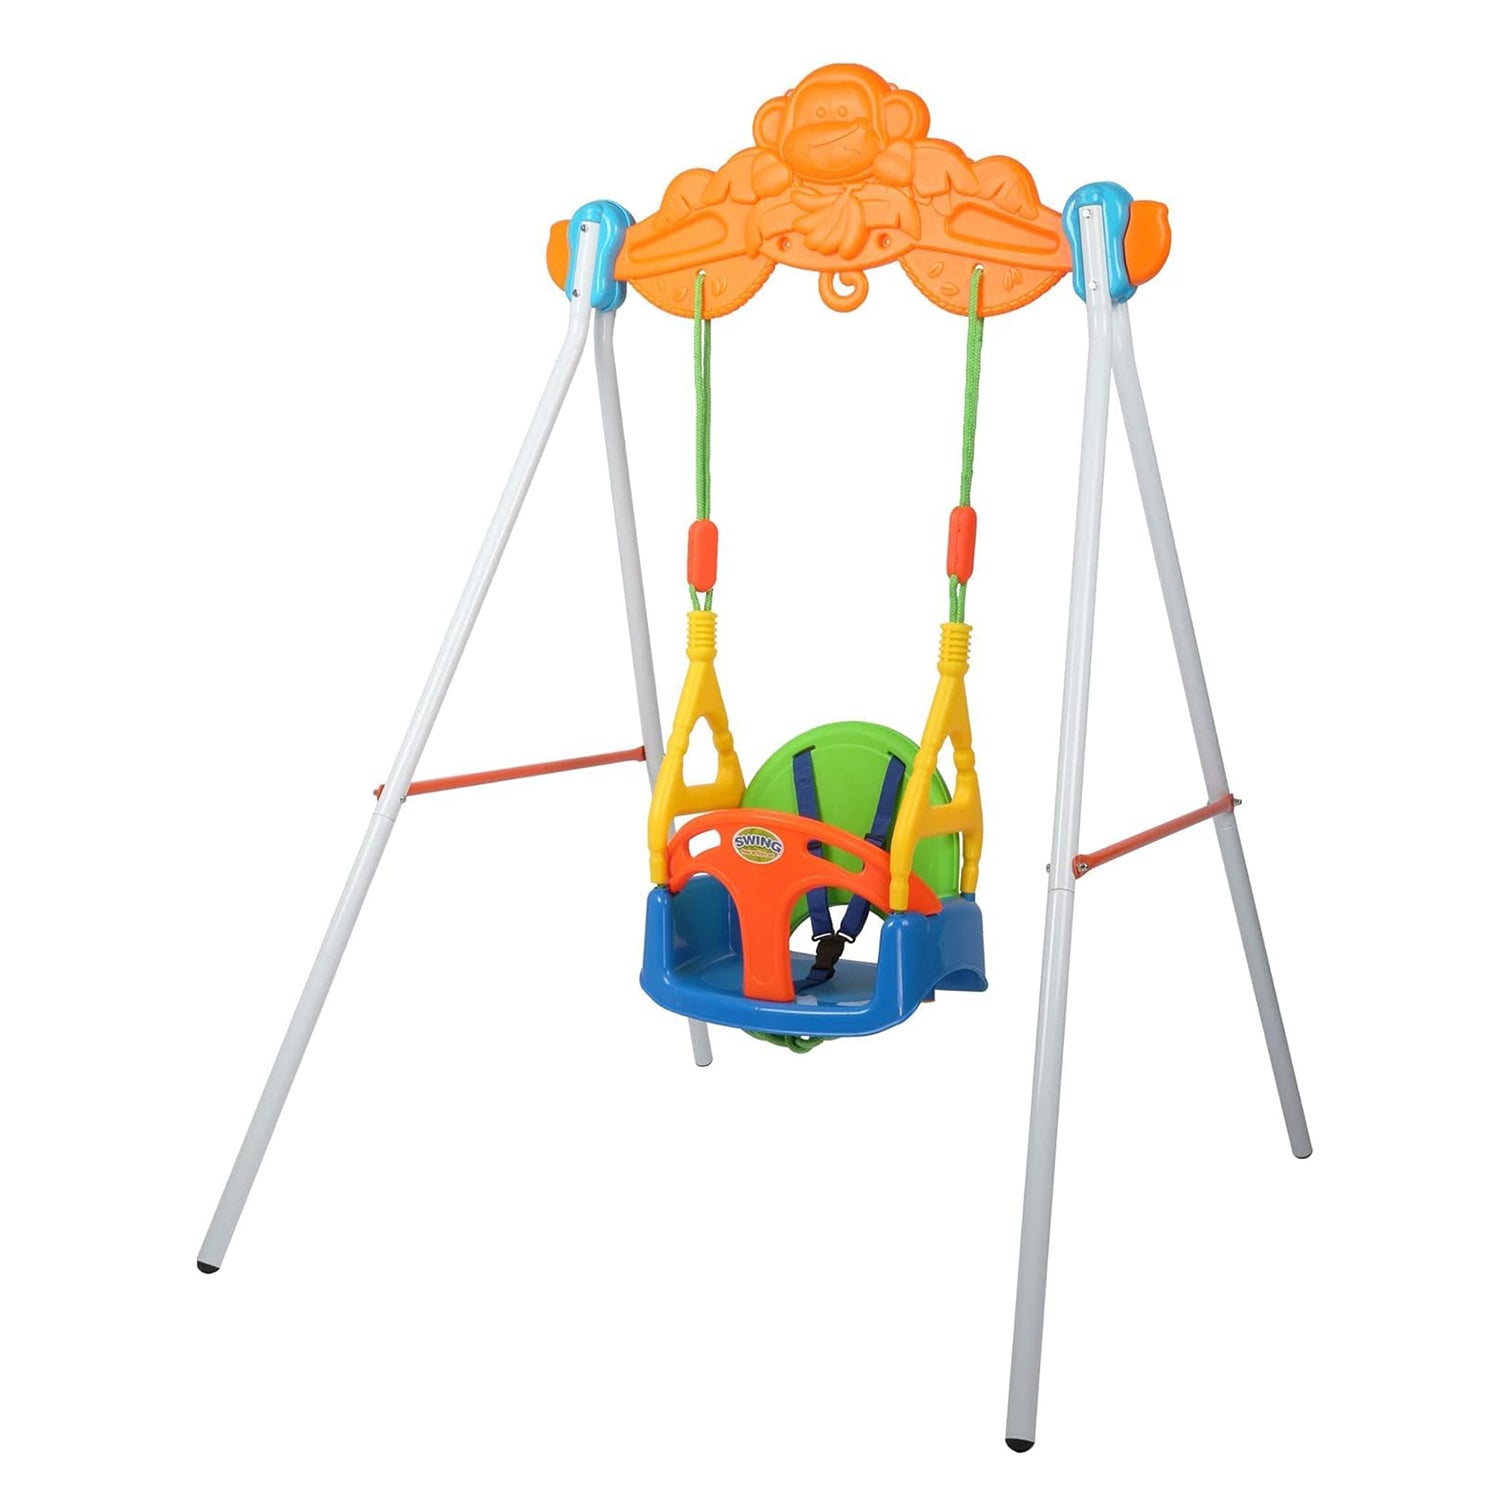 3 in 1 Baby Toddler Swing Set with Stand, Seat Belt and Metal Stand for Playground Indoor Backyard